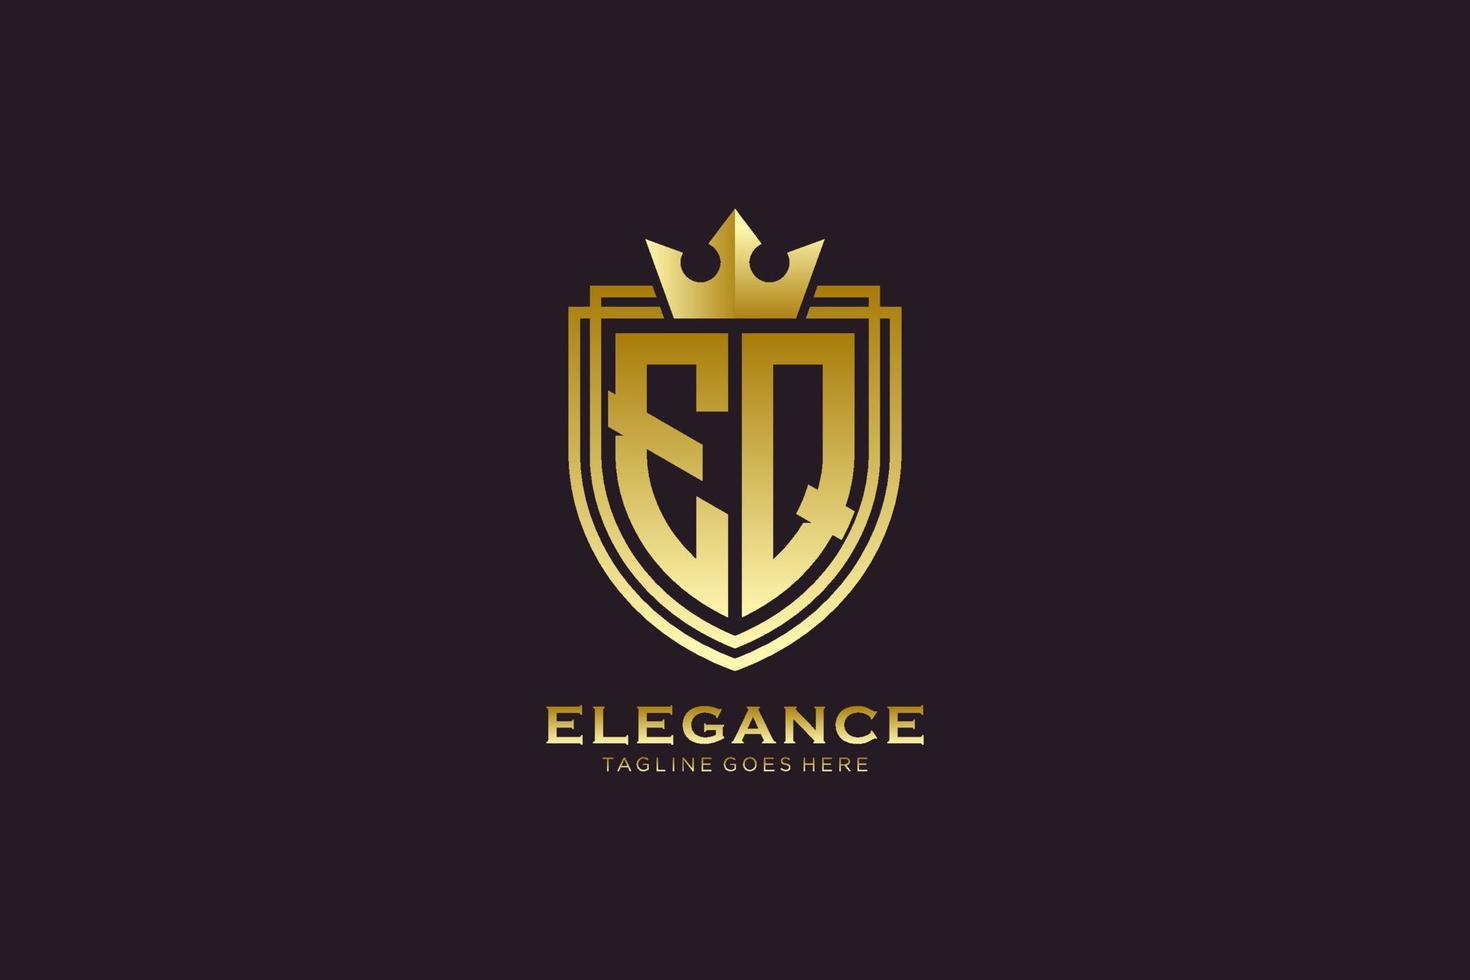 initial EQ elegant luxury monogram logo or badge template with scrolls and royal crown - perfect for luxurious branding projects vector